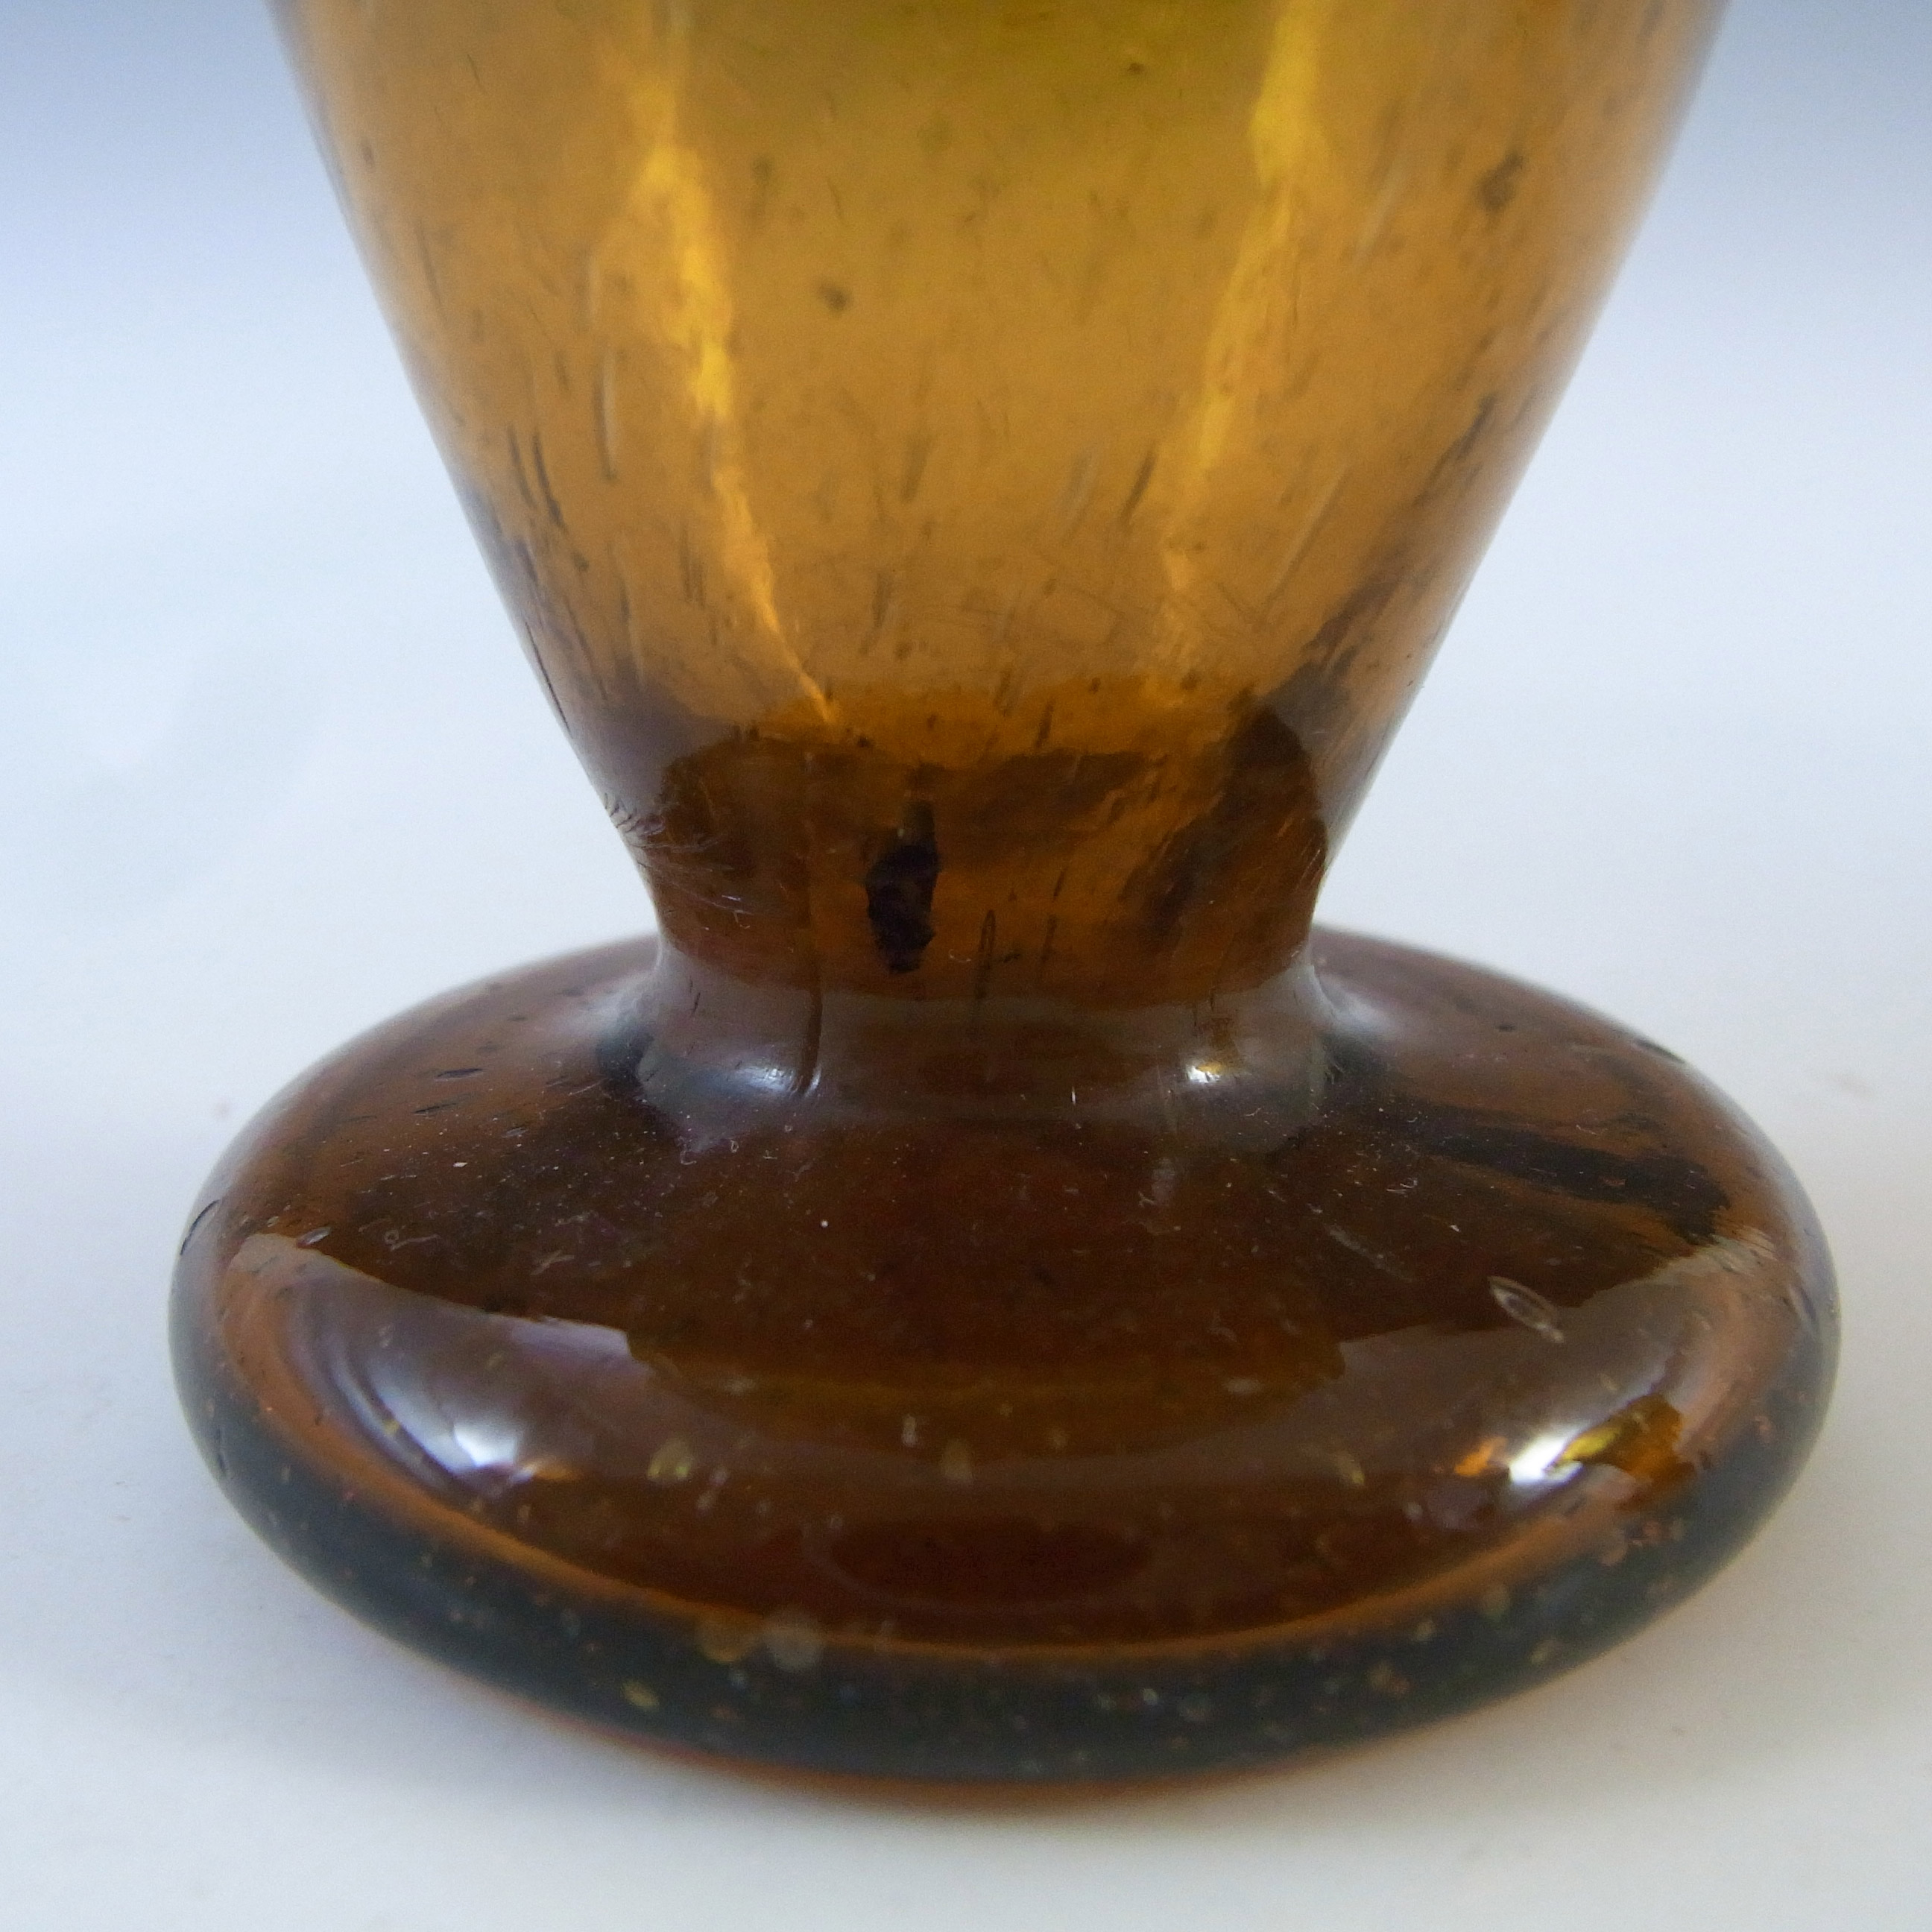 Egyptian Recycled "Muski" Bubbly Amber Glass Port or Sherry Glasses - Click Image to Close